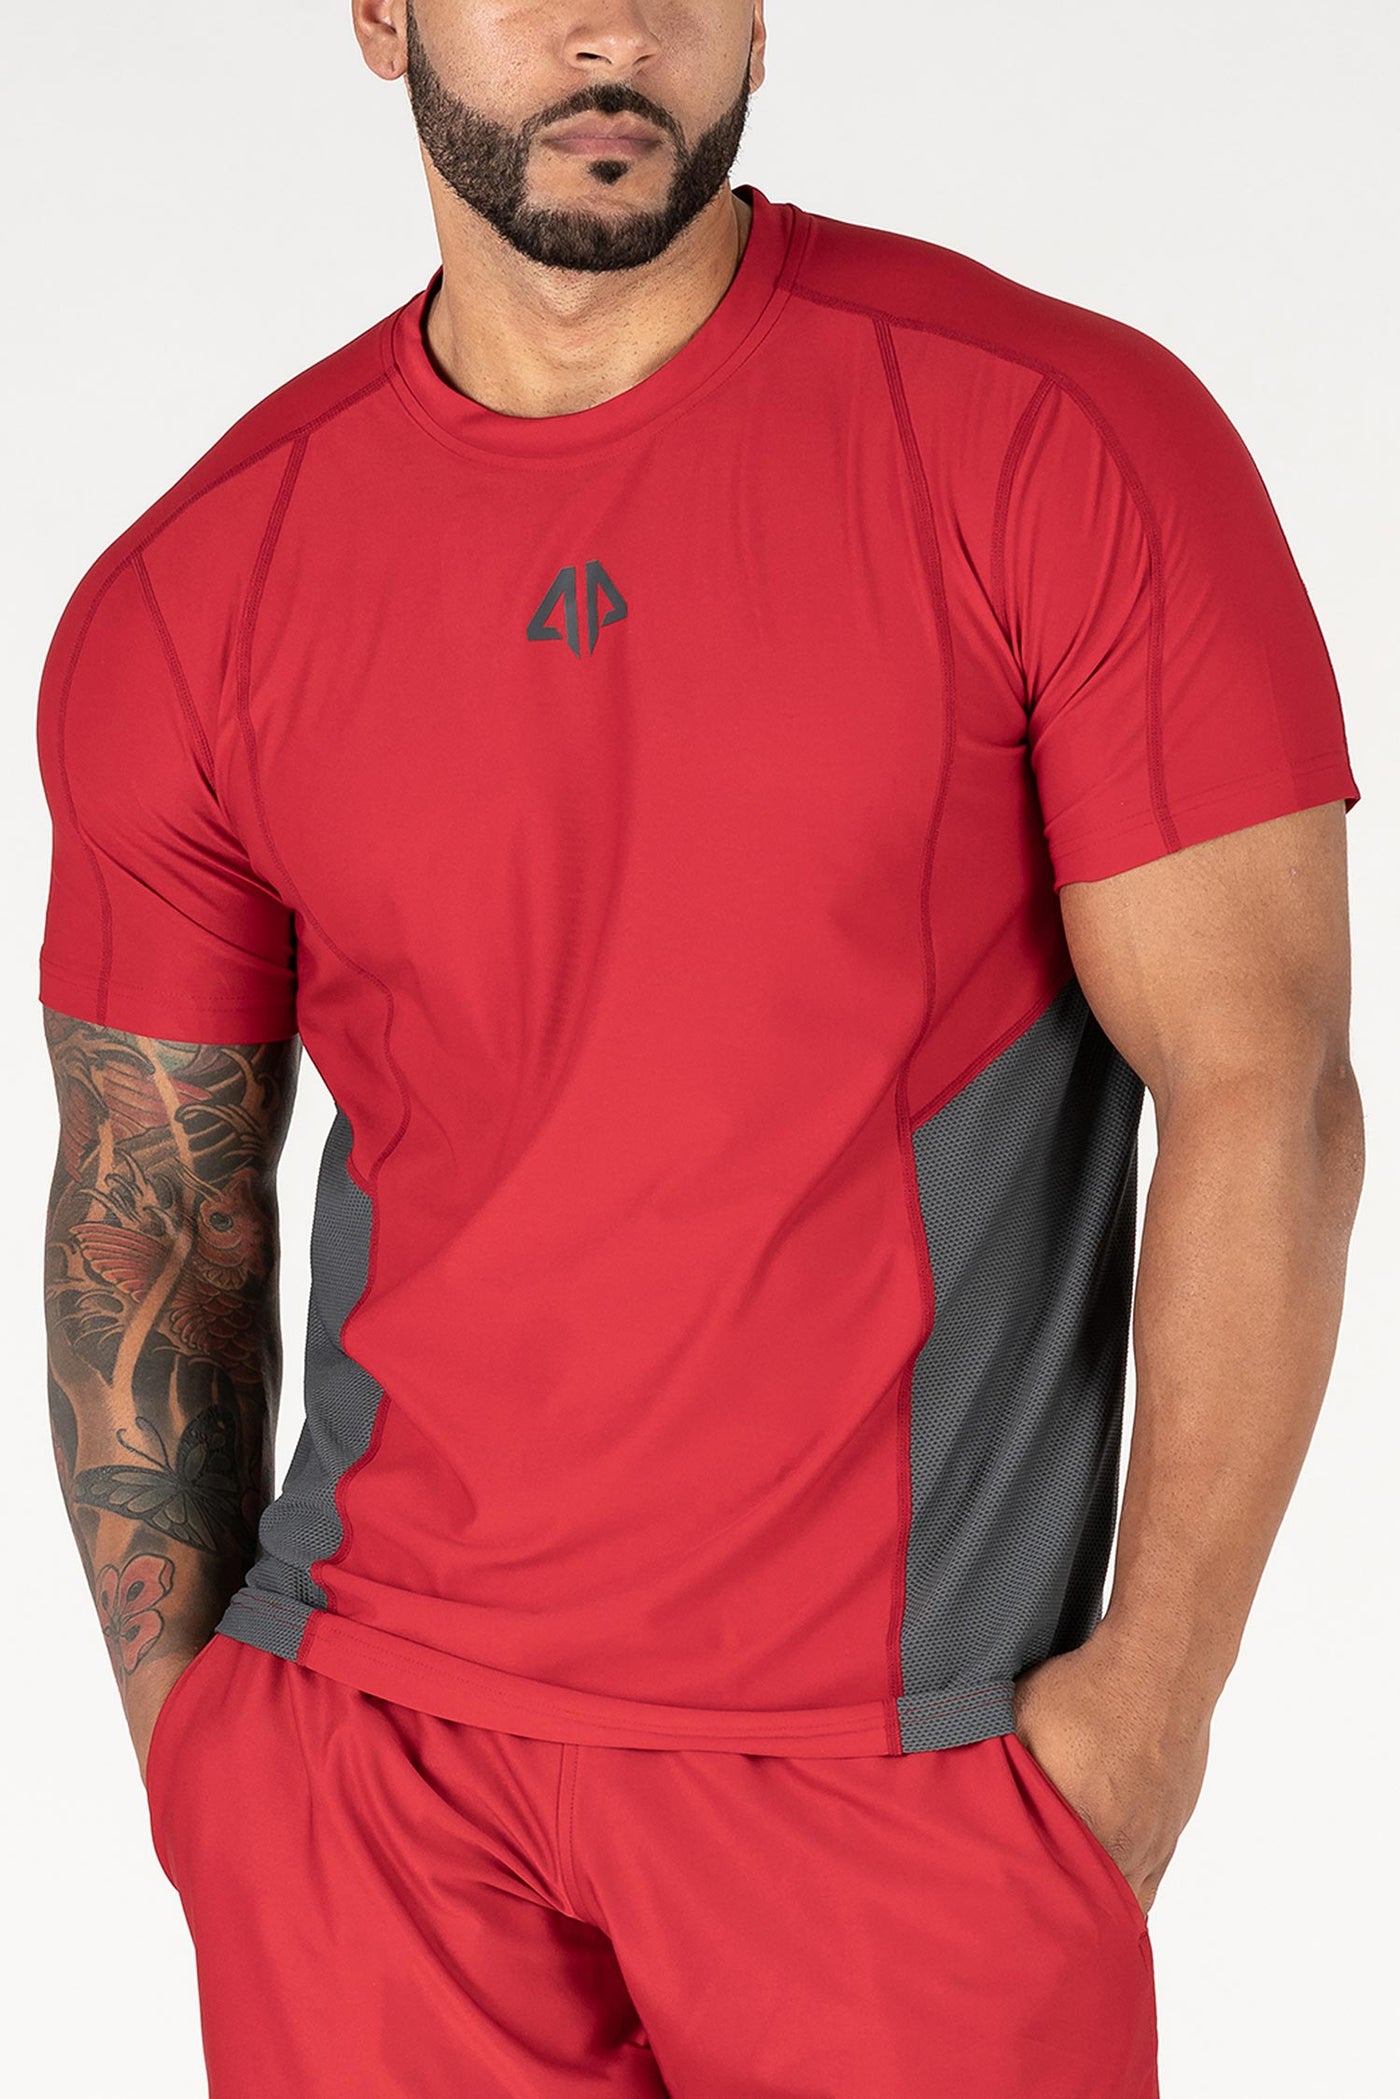 5 Day Alpha prime workout gear 